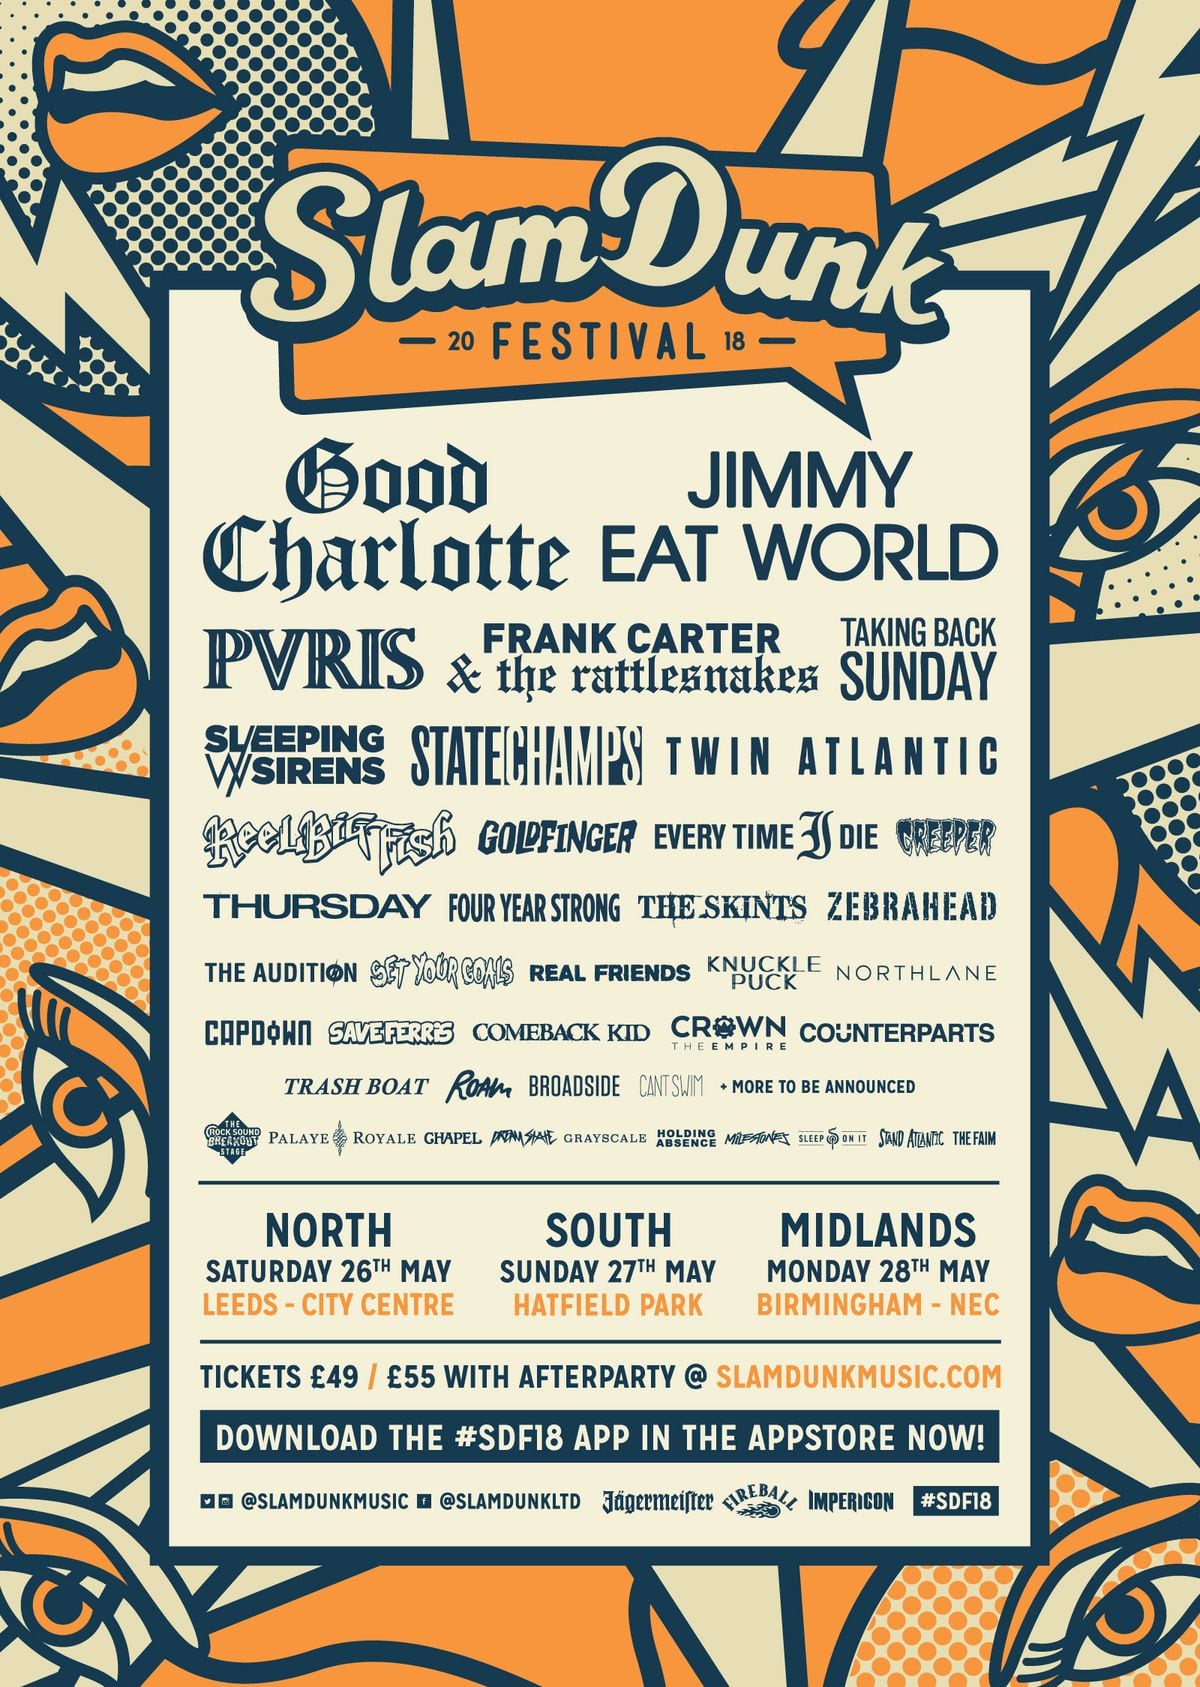 Slam Dunk Festival 2018 Competition to play the event revealed and